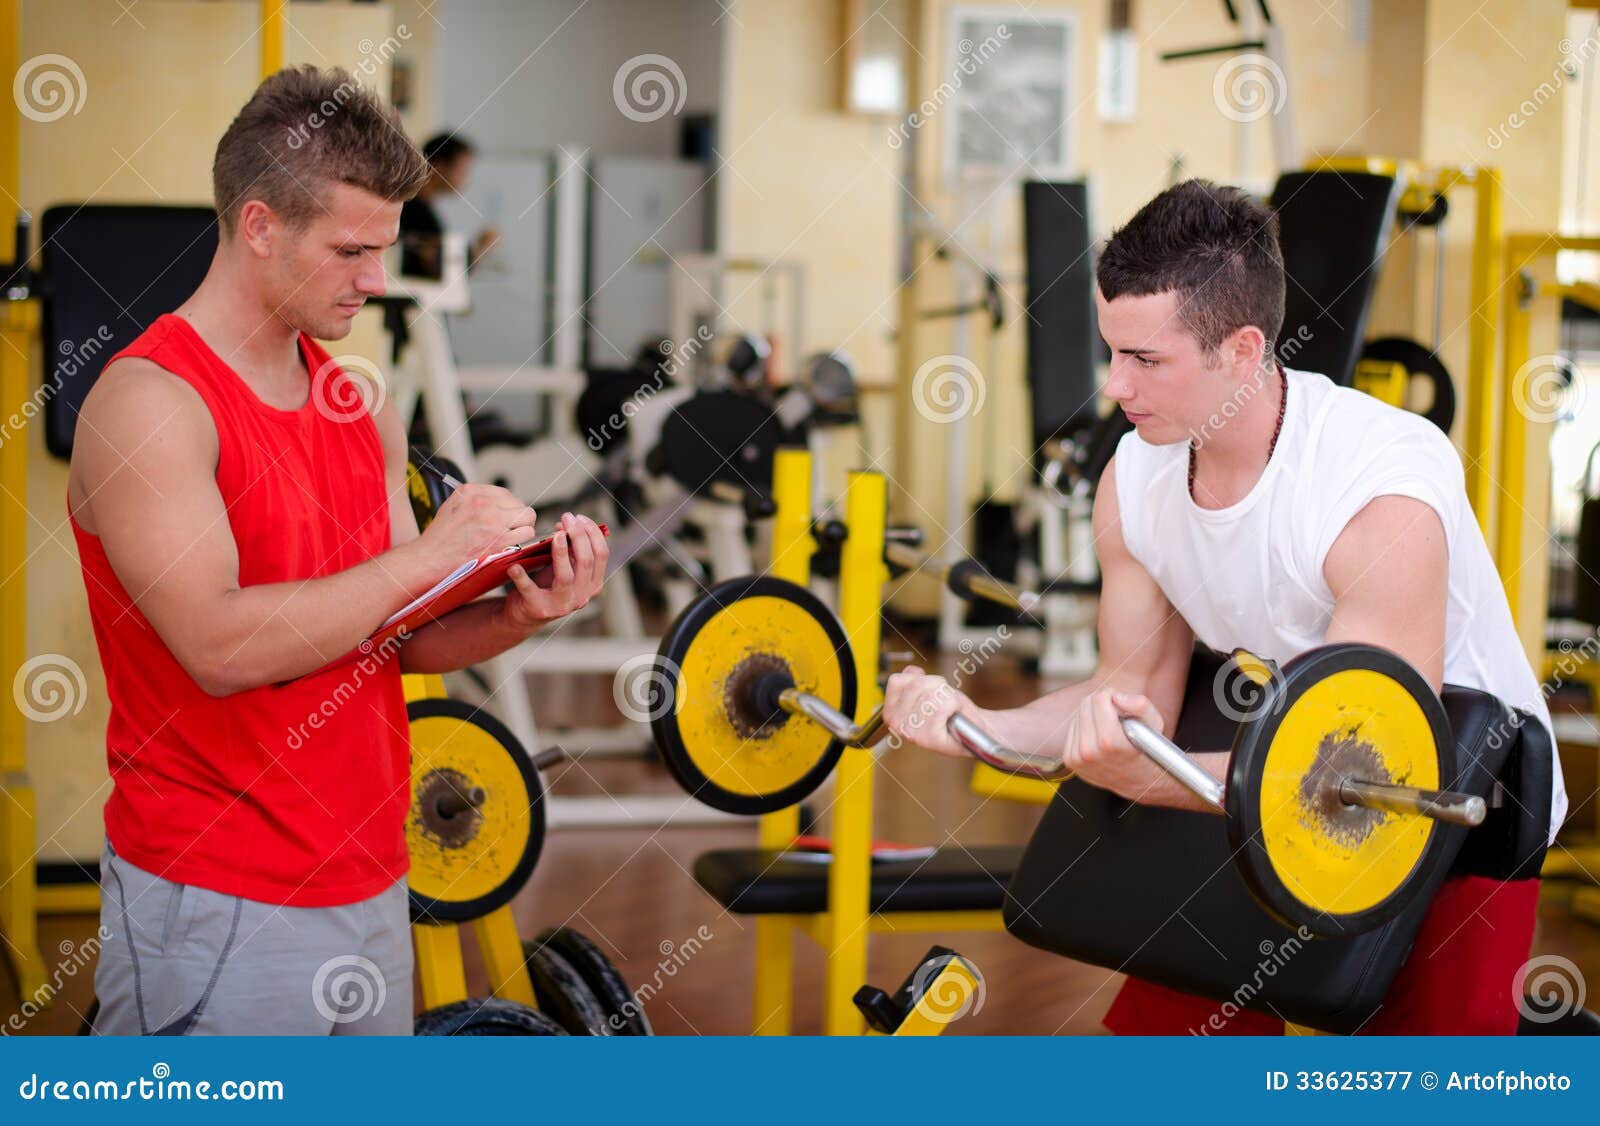 https://thumbs.dreamstime.com/z/personal-trainer-helping-client-gym-young-male-workout-equipment-33625377.jpg